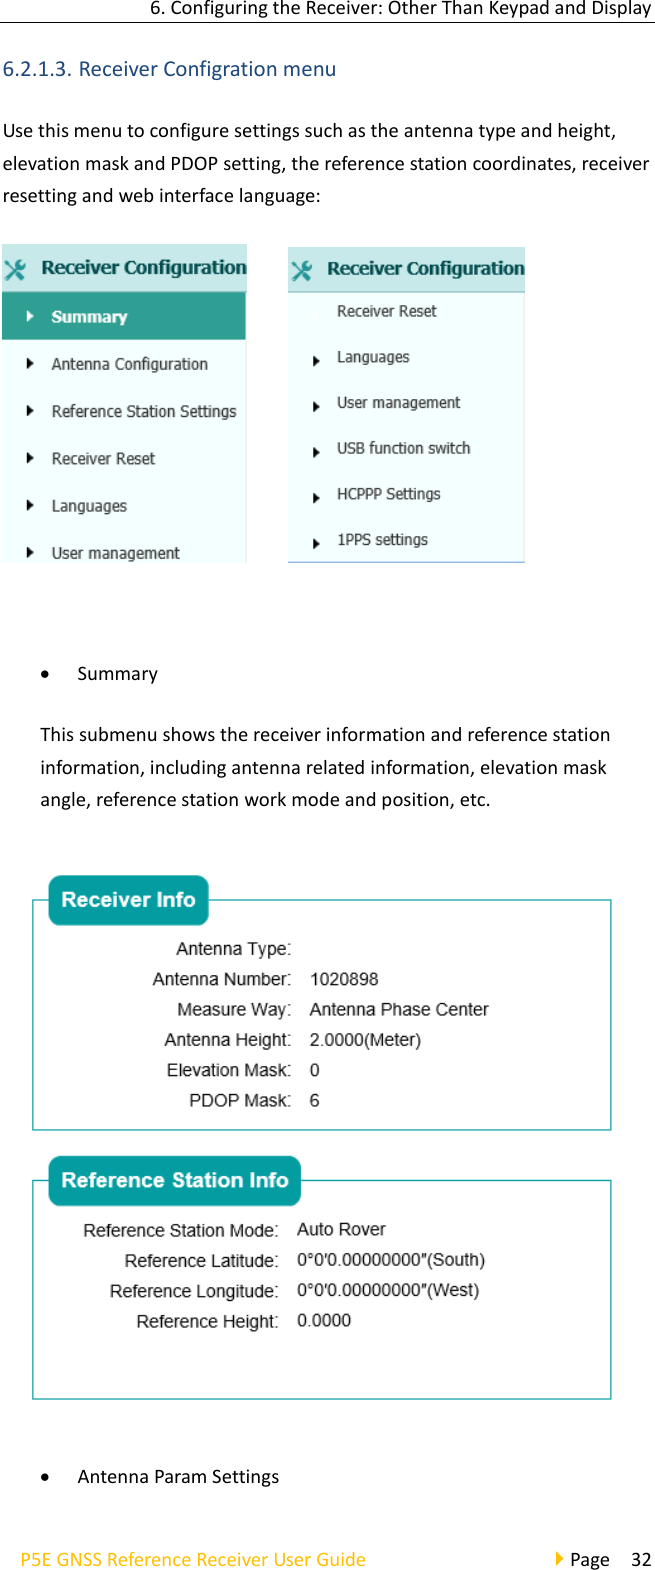 6. Configuring the Receiver: Other Than Keypad and Display P5E GNSS Reference Receiver User Guide                                     Page  32 6.2.1.3. Receiver Configration menu Use this menu to configure settings such as the antenna type and height, elevation mask and PDOP setting, the reference station coordinates, receiver resetting and web interface language:        • Summary This submenu shows the receiver information and reference station information, including antenna related information, elevation mask angle, reference station work mode and position, etc.  • Antenna Param Settings 